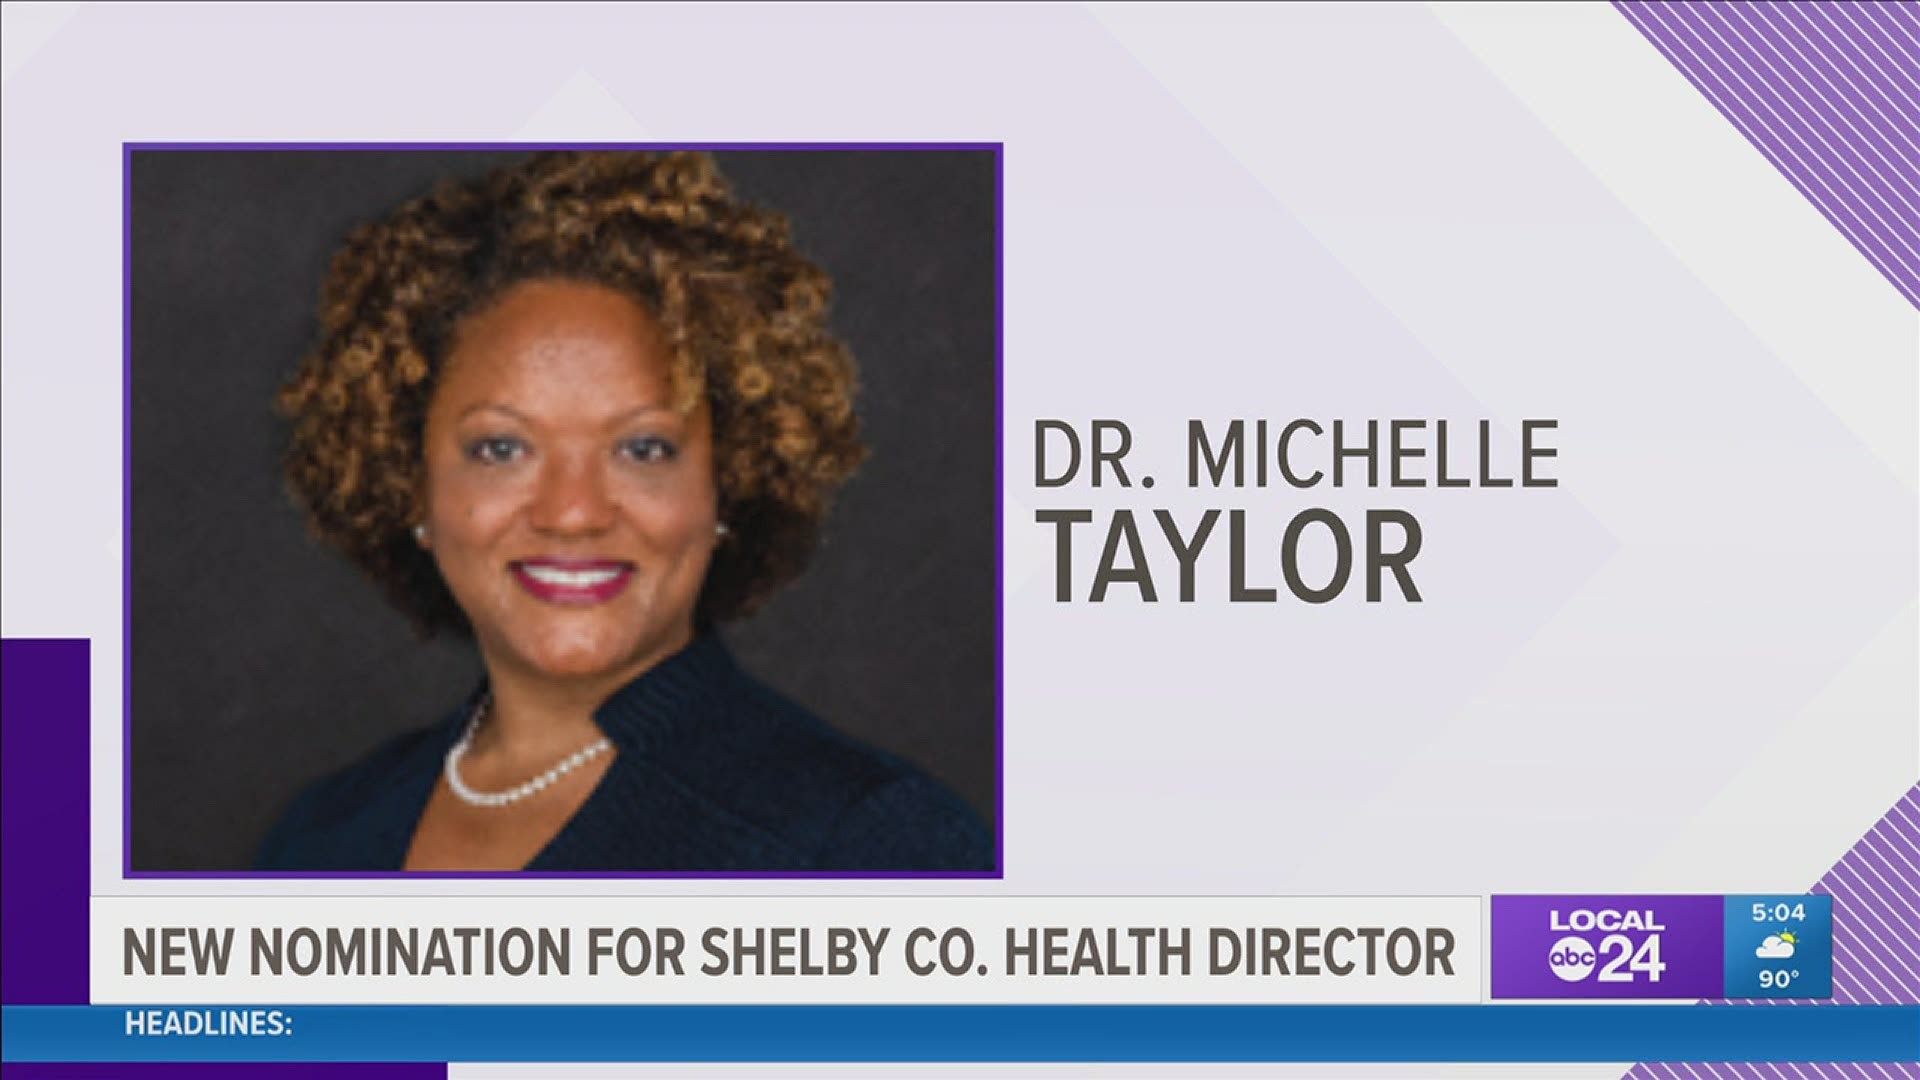 Shelby County Mayor Lee Harris has nominated Dr. Michelle Taylor to be the next director of the Shelby County Health Department.